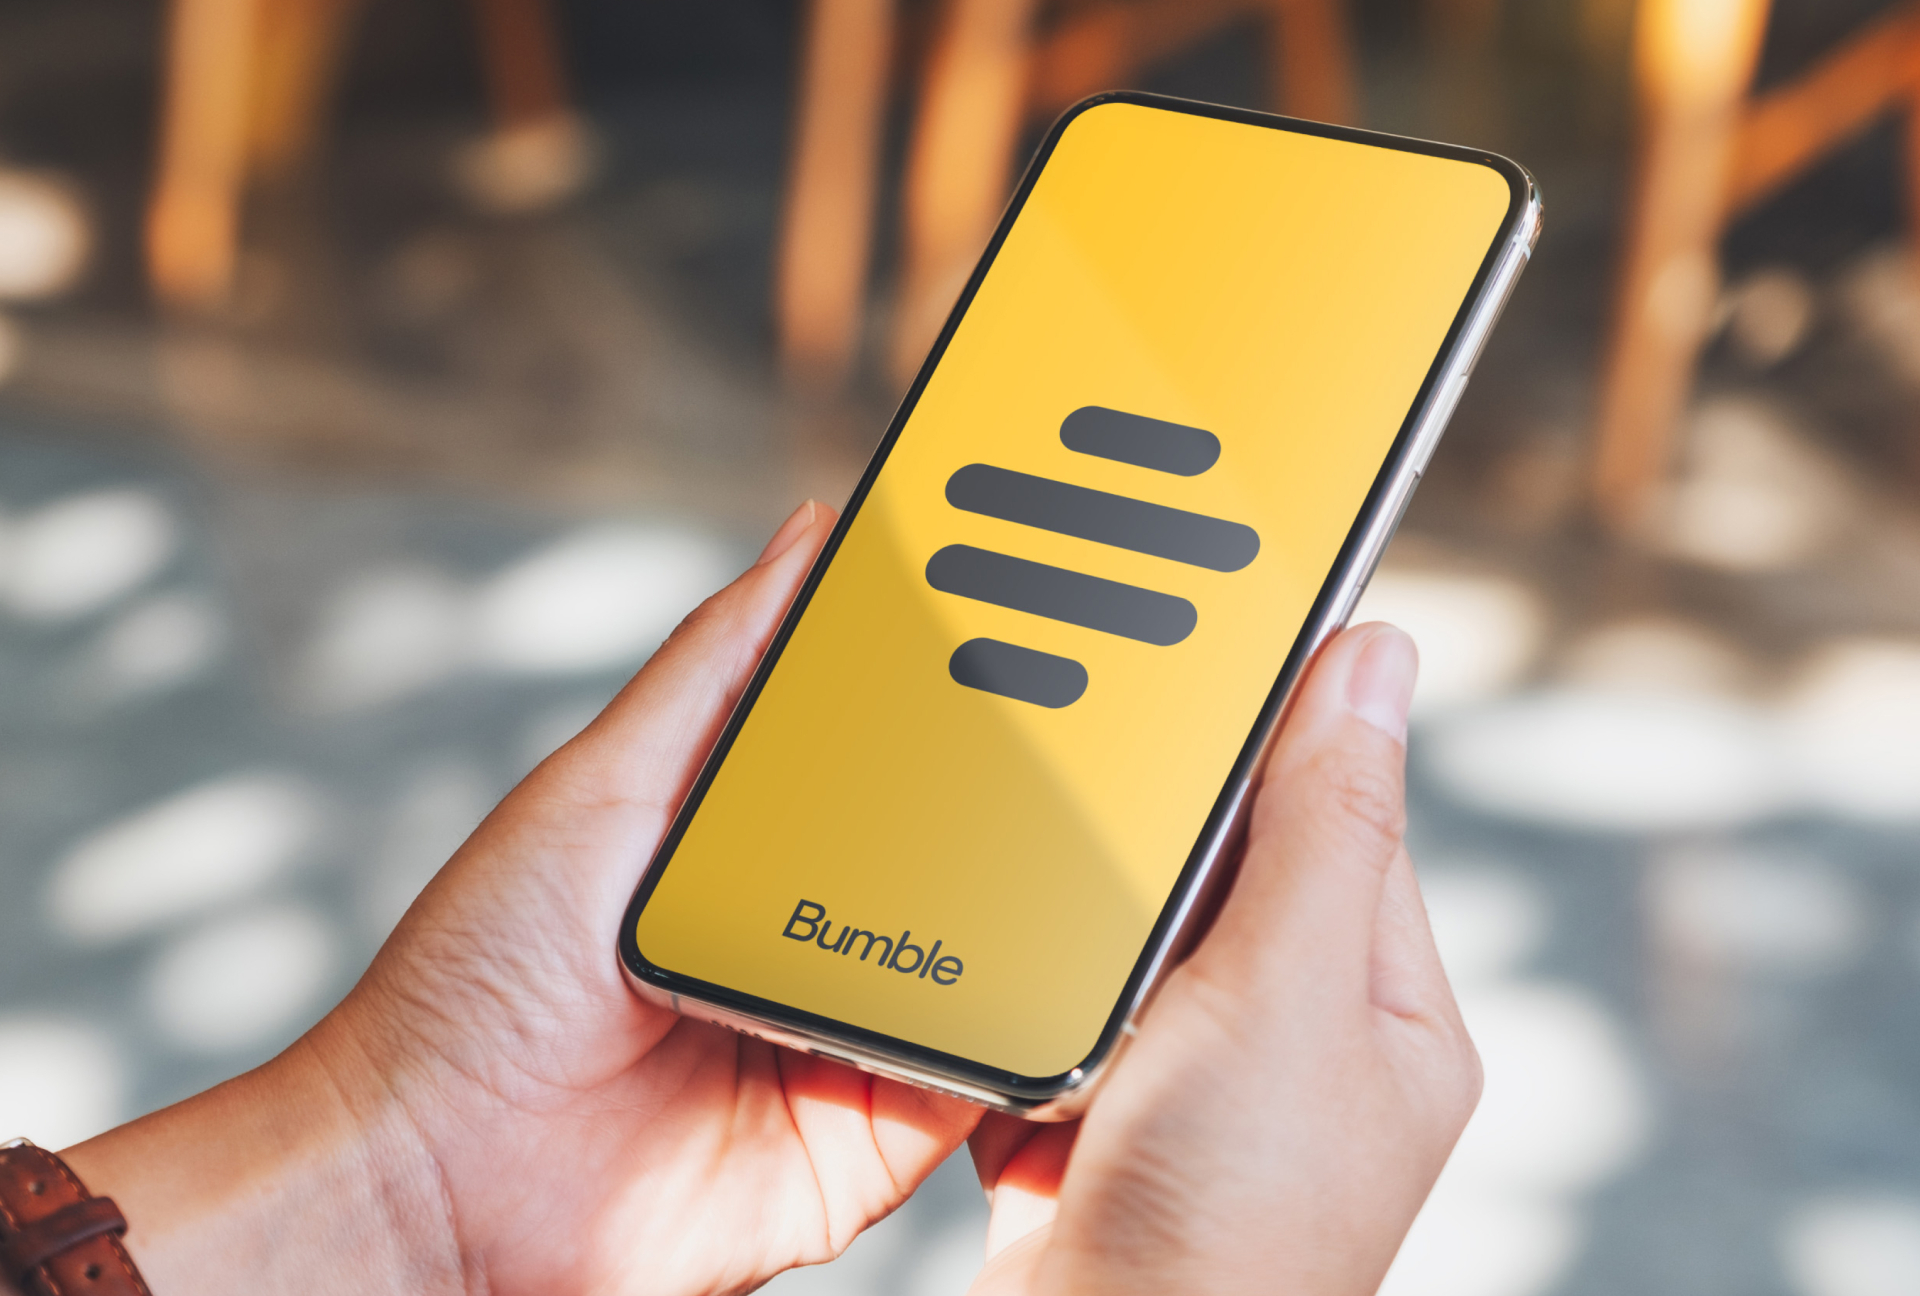 Dating app Bumble to ask users to report AI-generated images